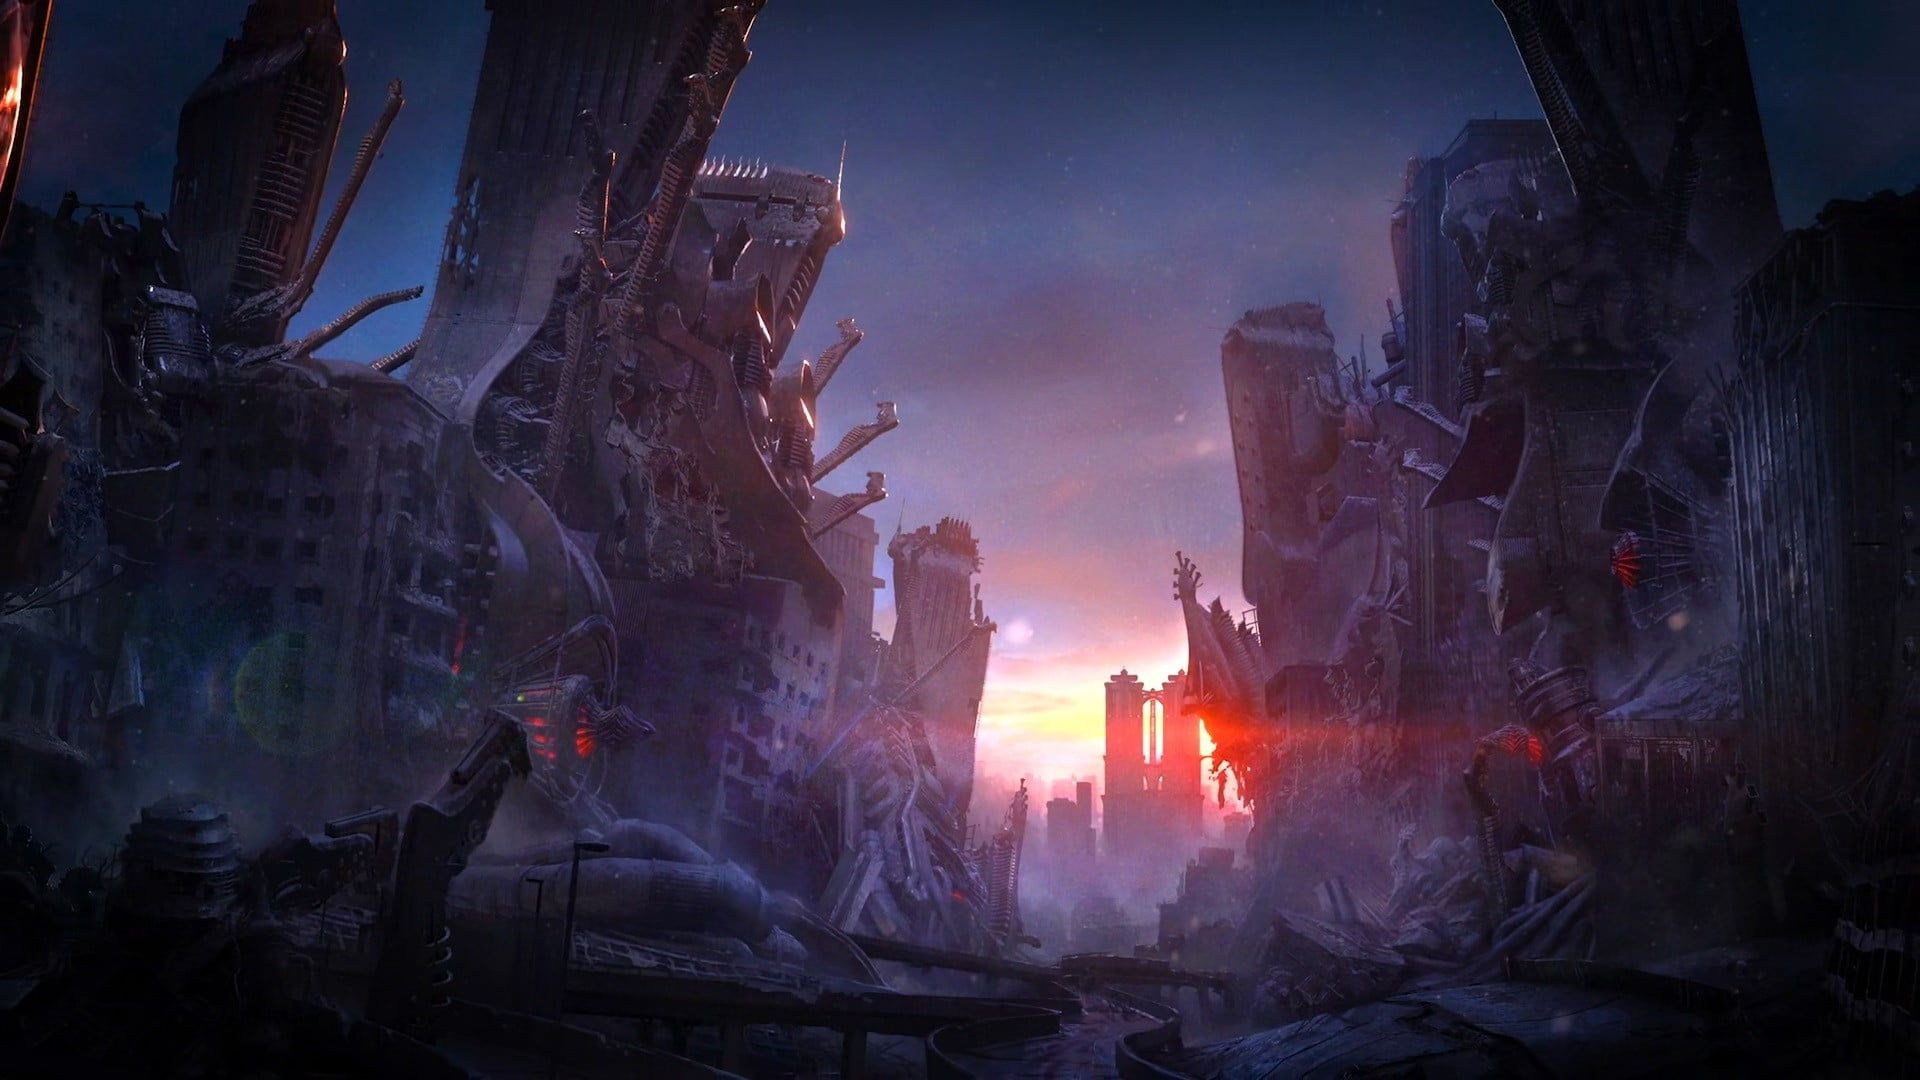 Destroy Building And Tower Wallpaper, Apocalyptic, Fantasy